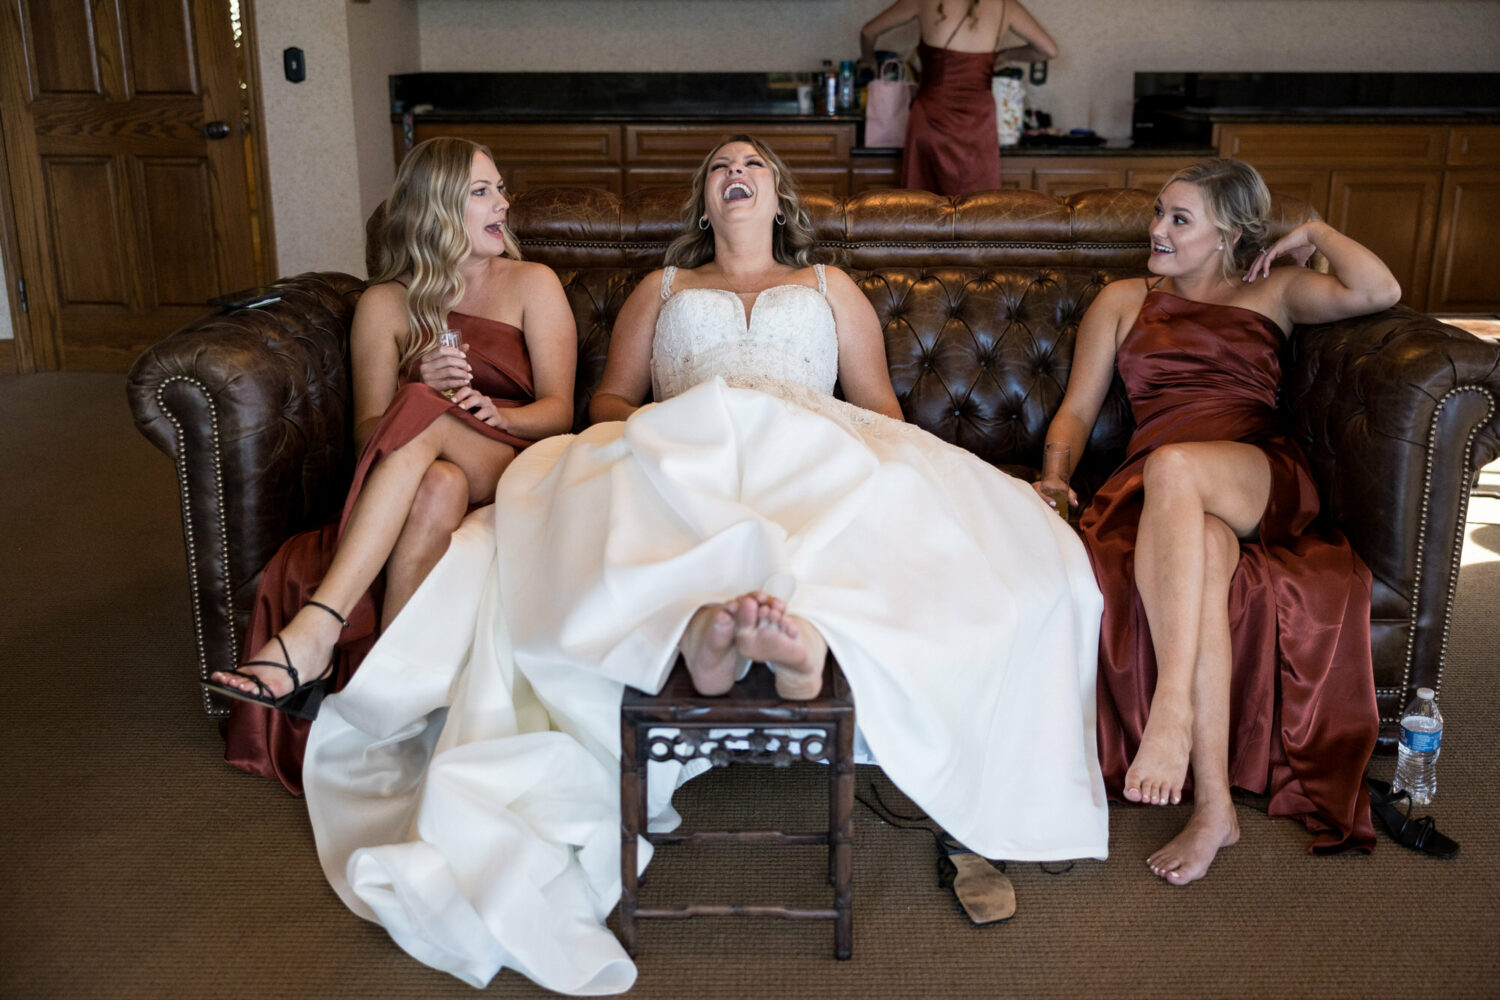 A bride practices self-care on her wedding day by putting her feet up and laughing with her friends.